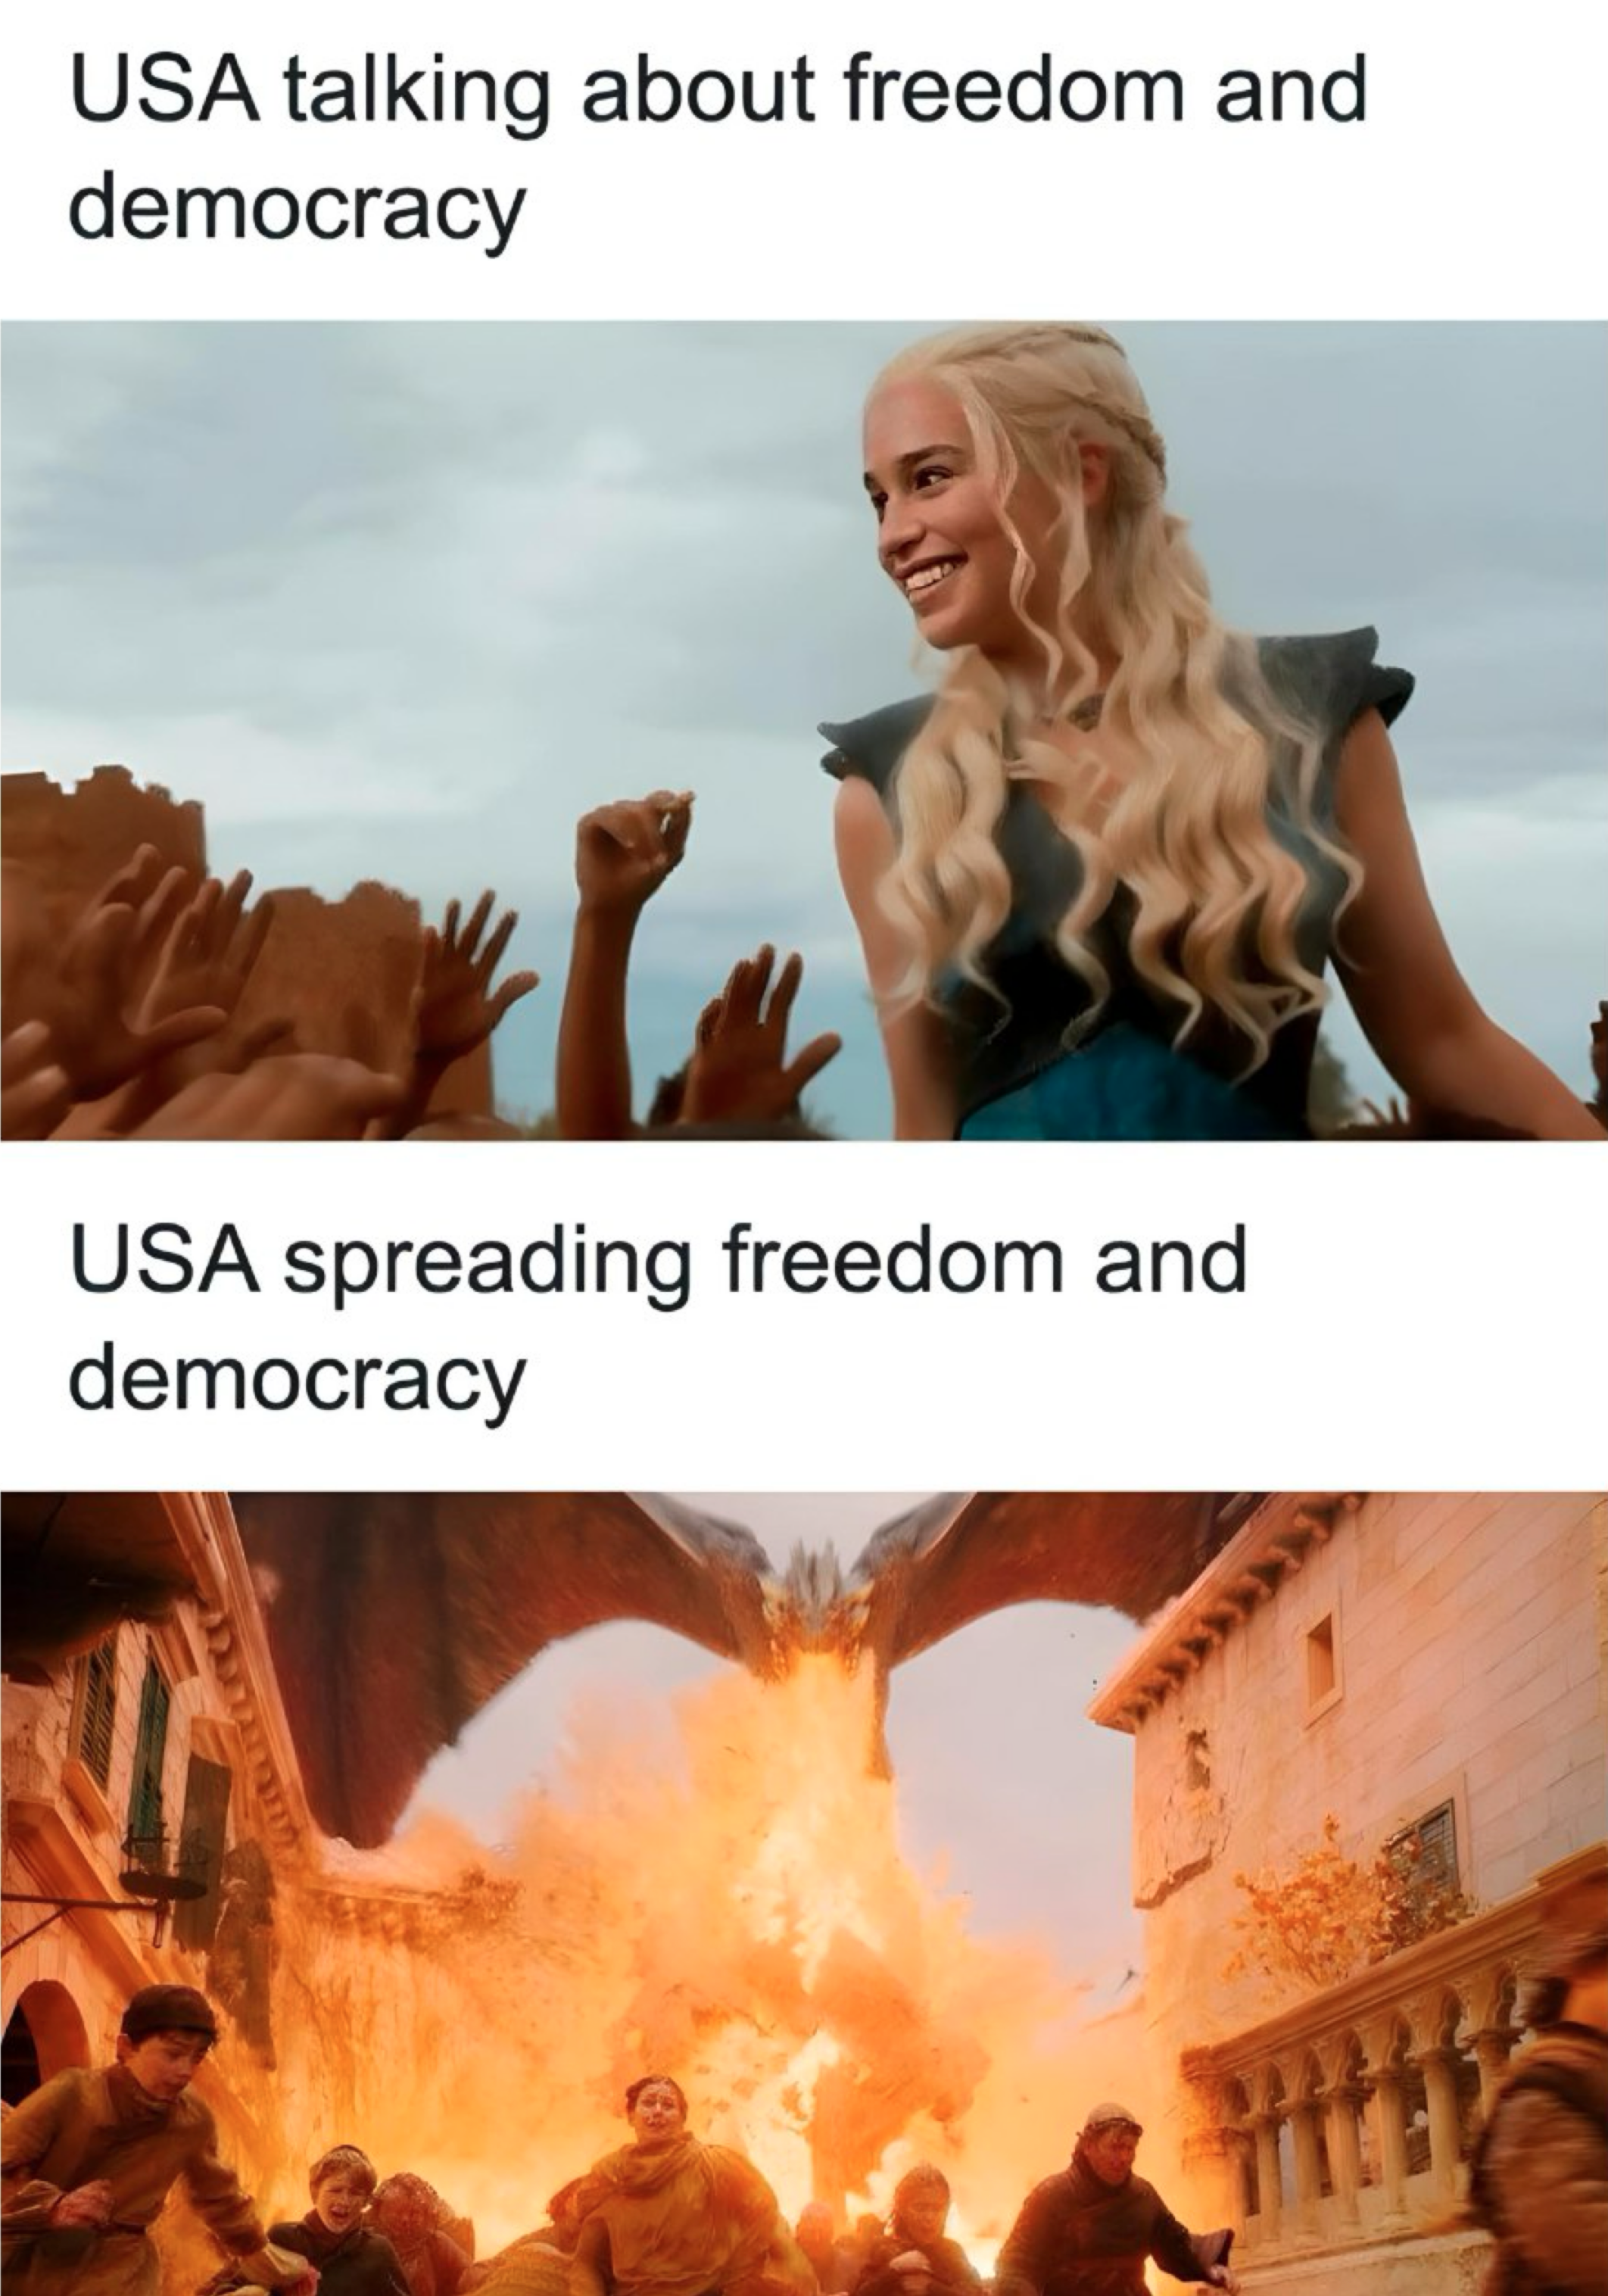 USA talking about freedom and democracy: picture of Daenerys Targaryen being cheerful USA spreading freedom and democracy: picture of people being incinerated by dragon fire